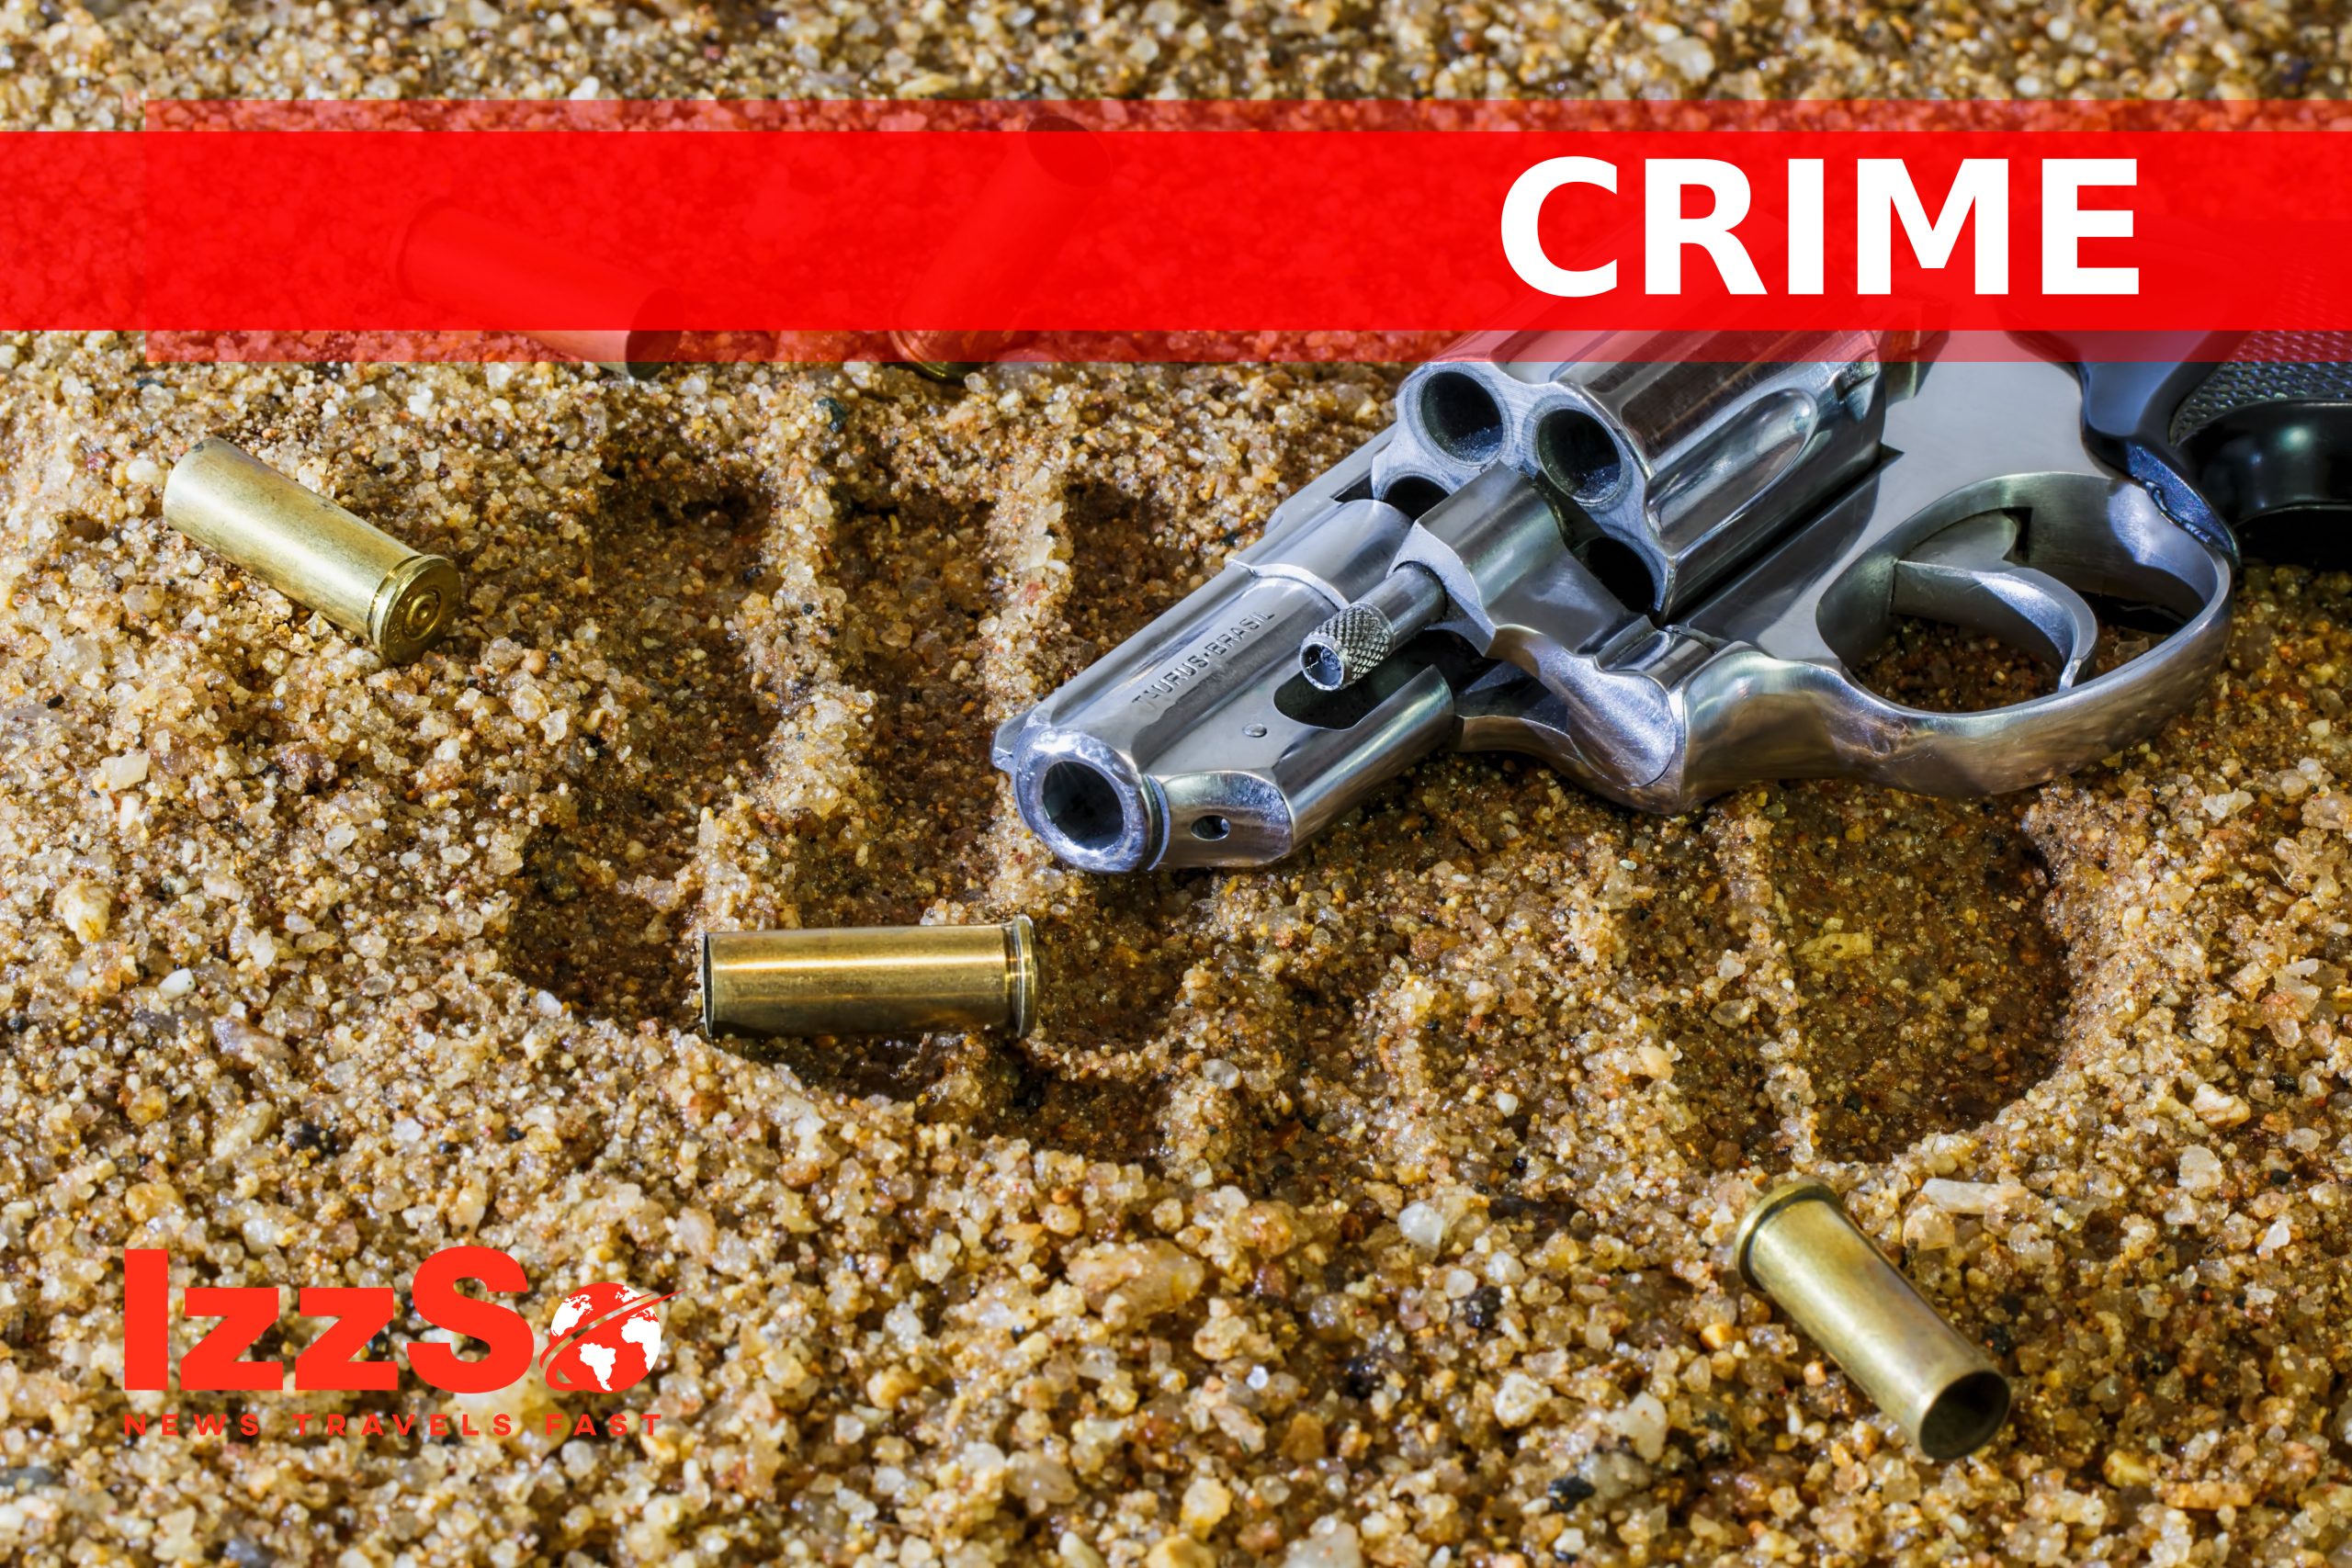 Early morning shooting in Malick – teen among 2 wounded